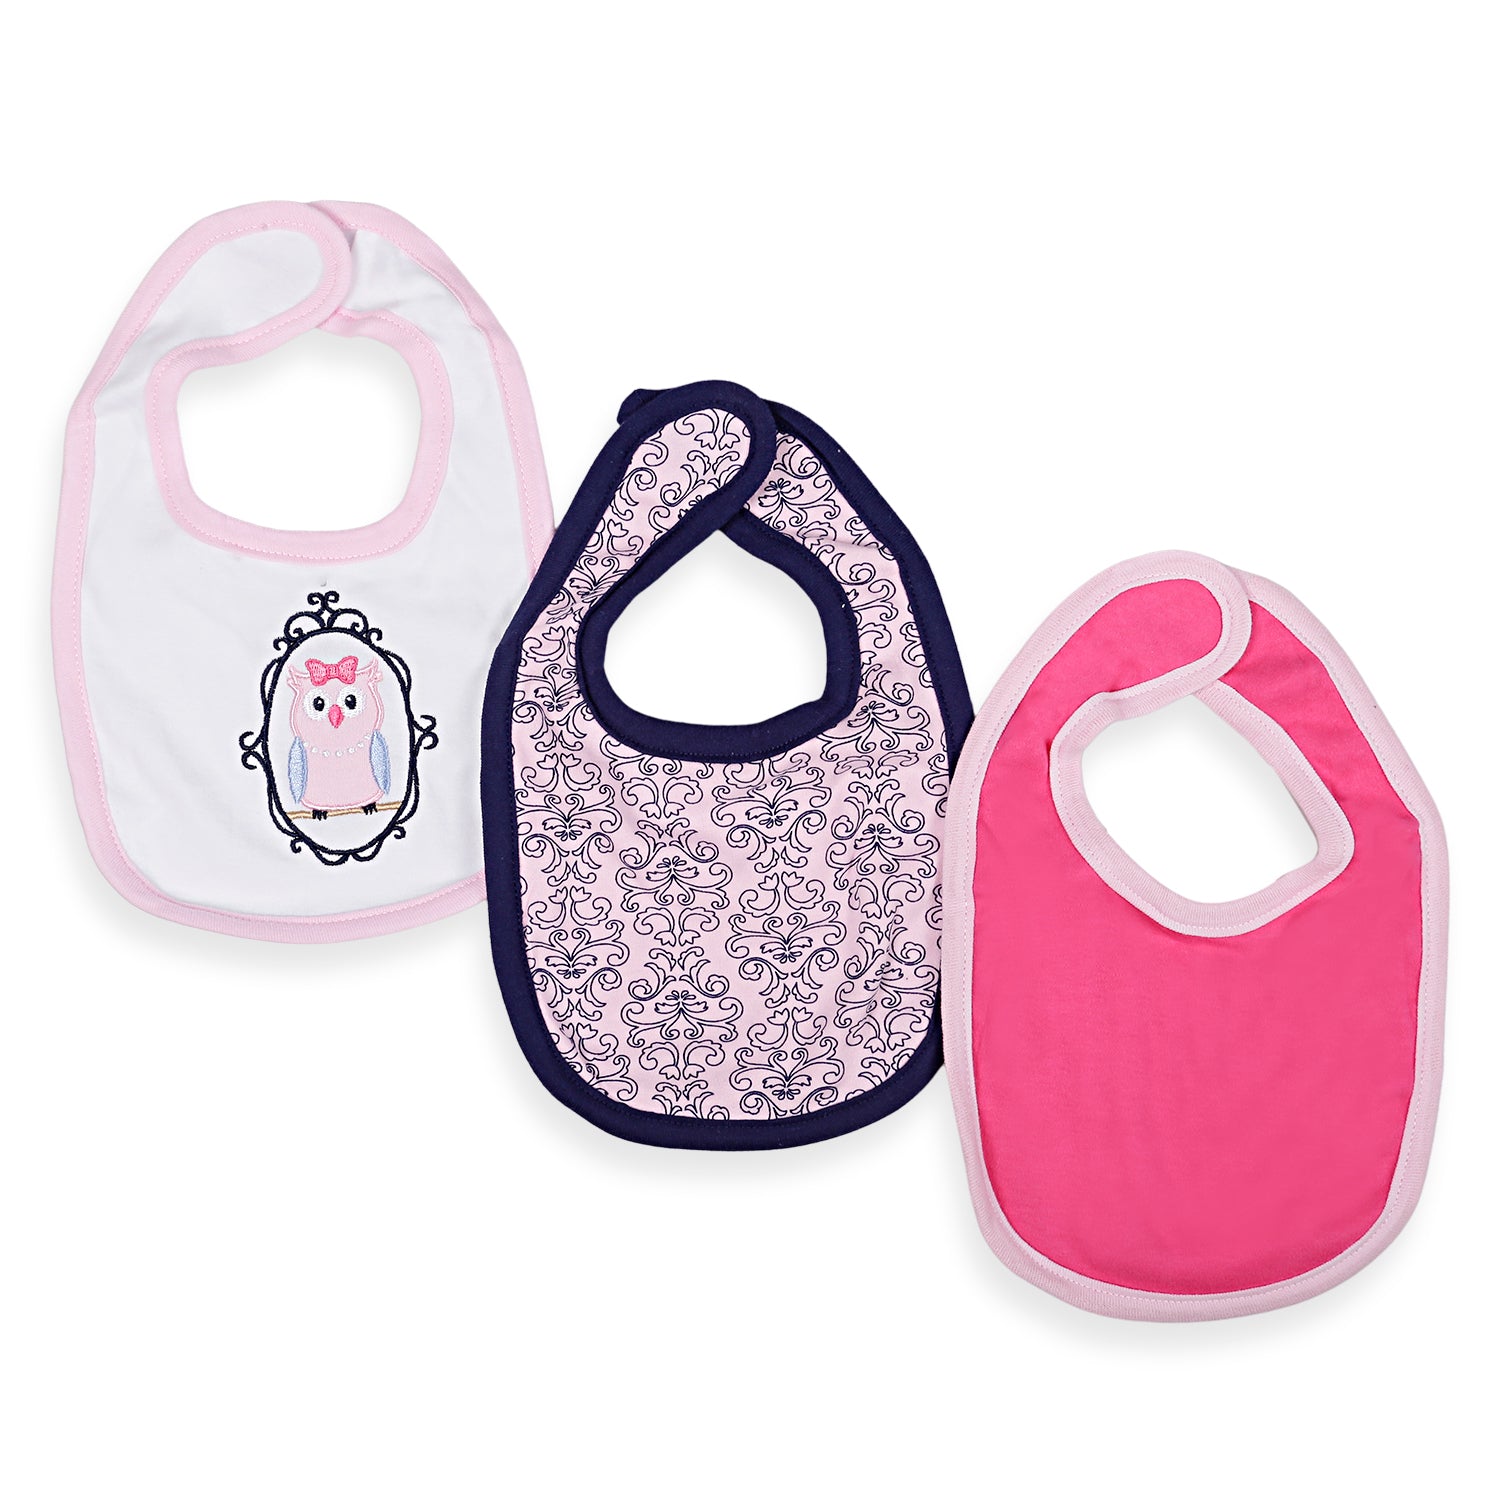 Feeding Bibs Pack Of 5 I'm So Fancy Pink And White - Baby Moo